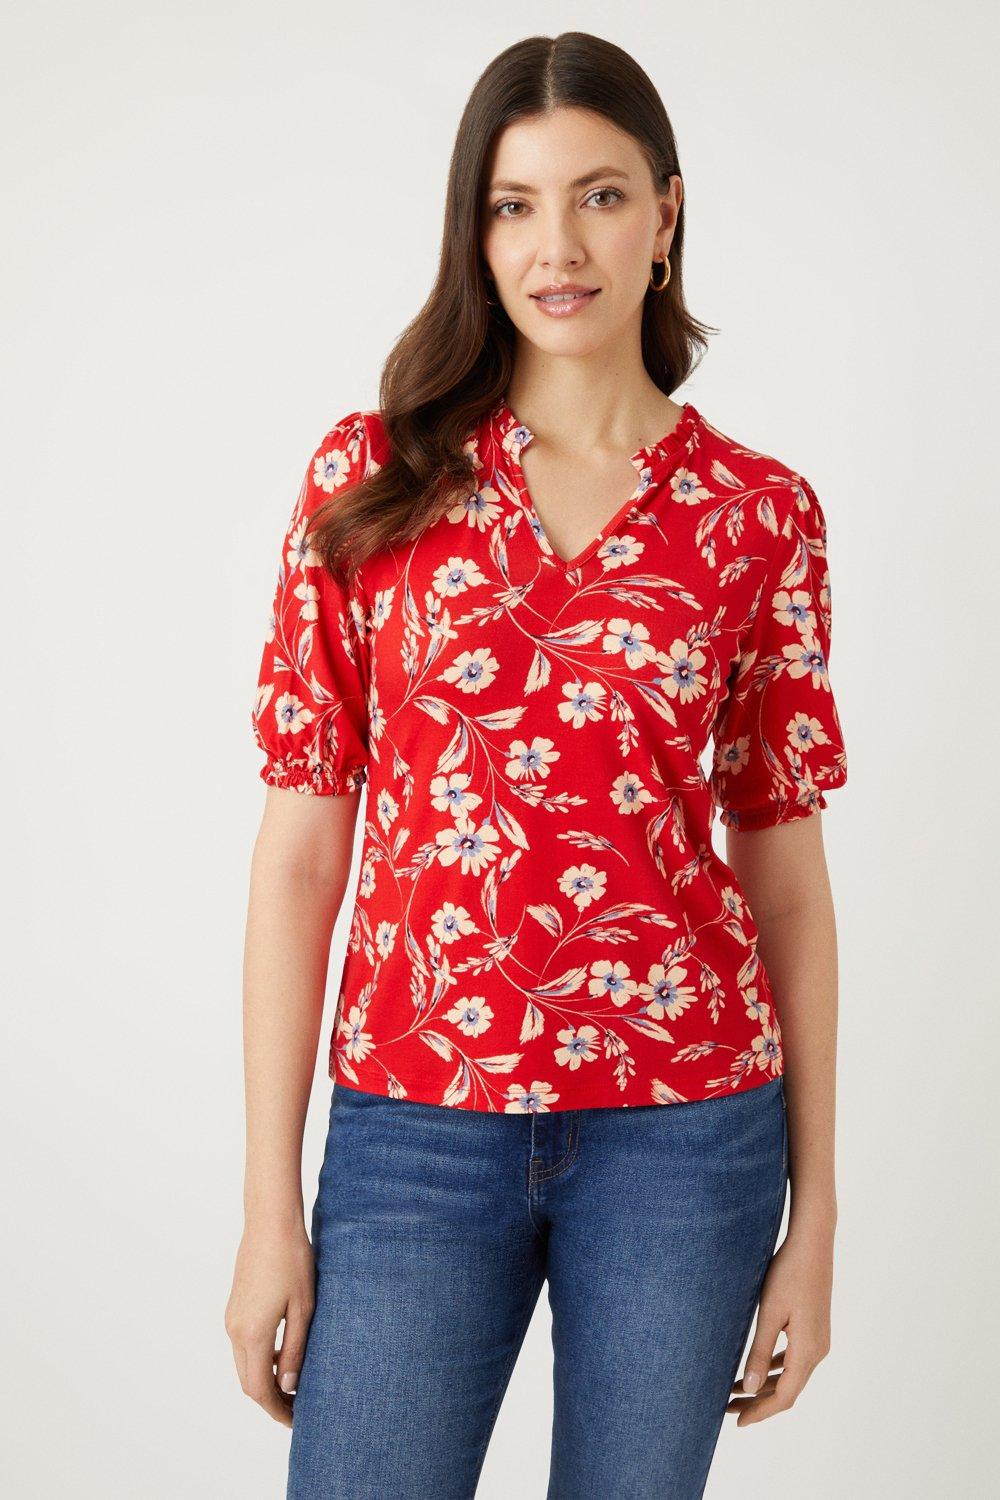 Womens Red Floral Print Ruched Sleeve Jersey Top